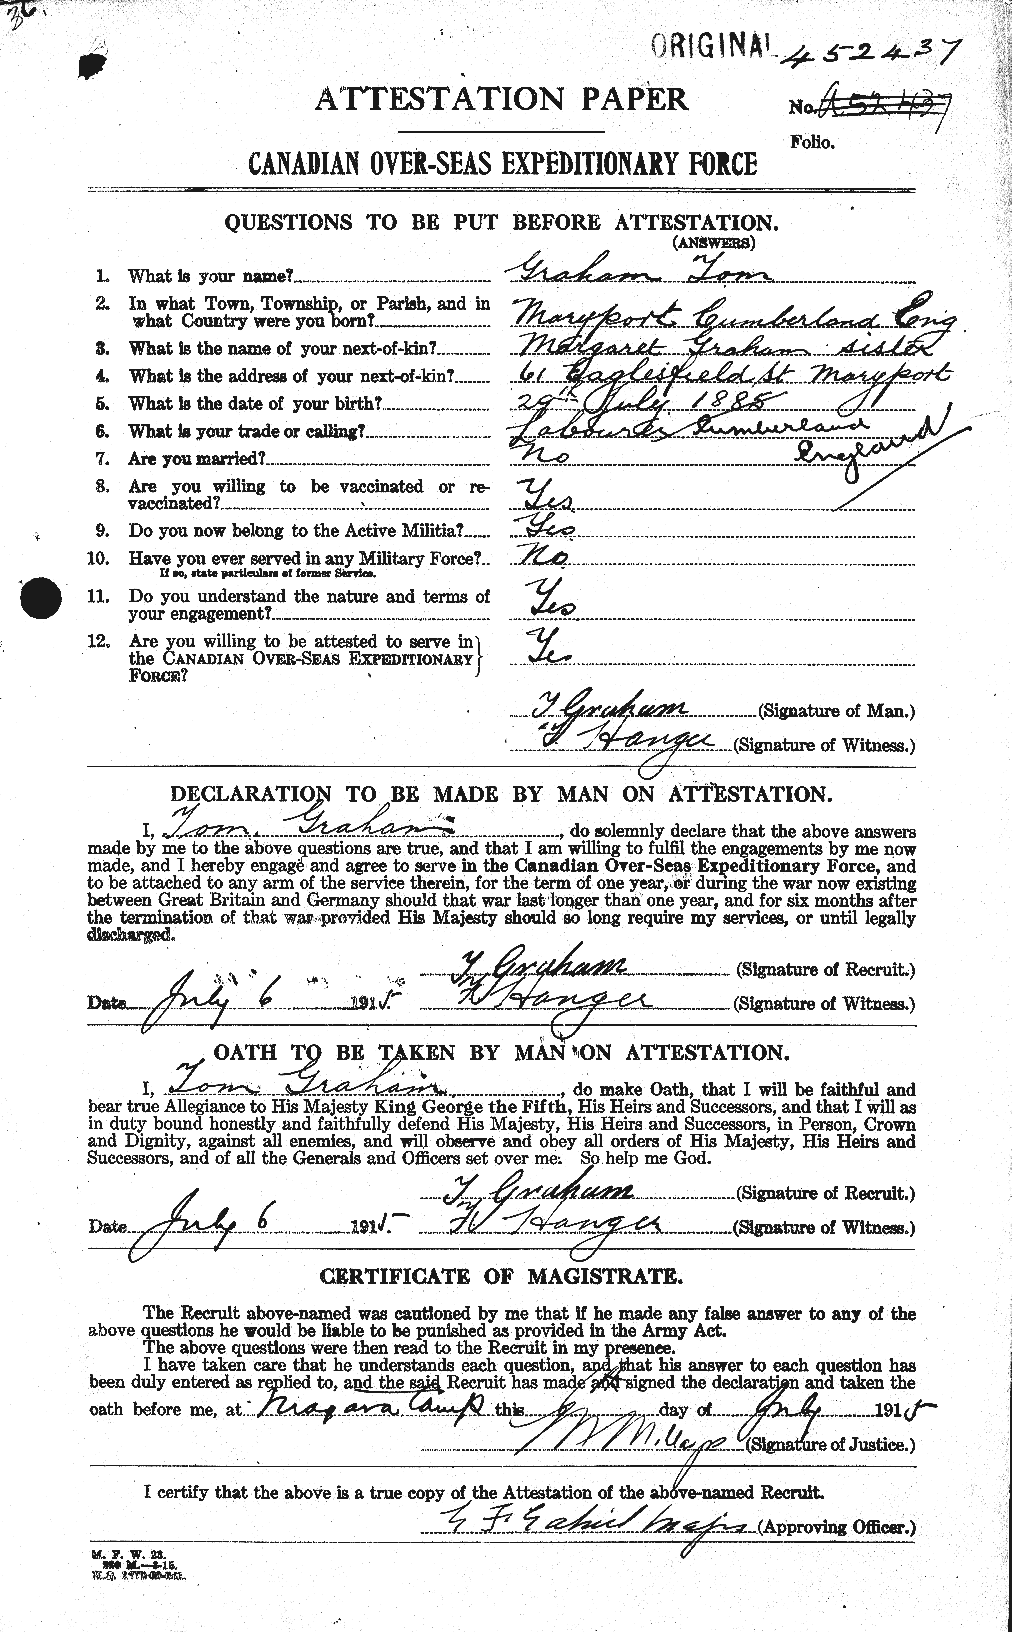 Personnel Records of the First World War - CEF 359535a